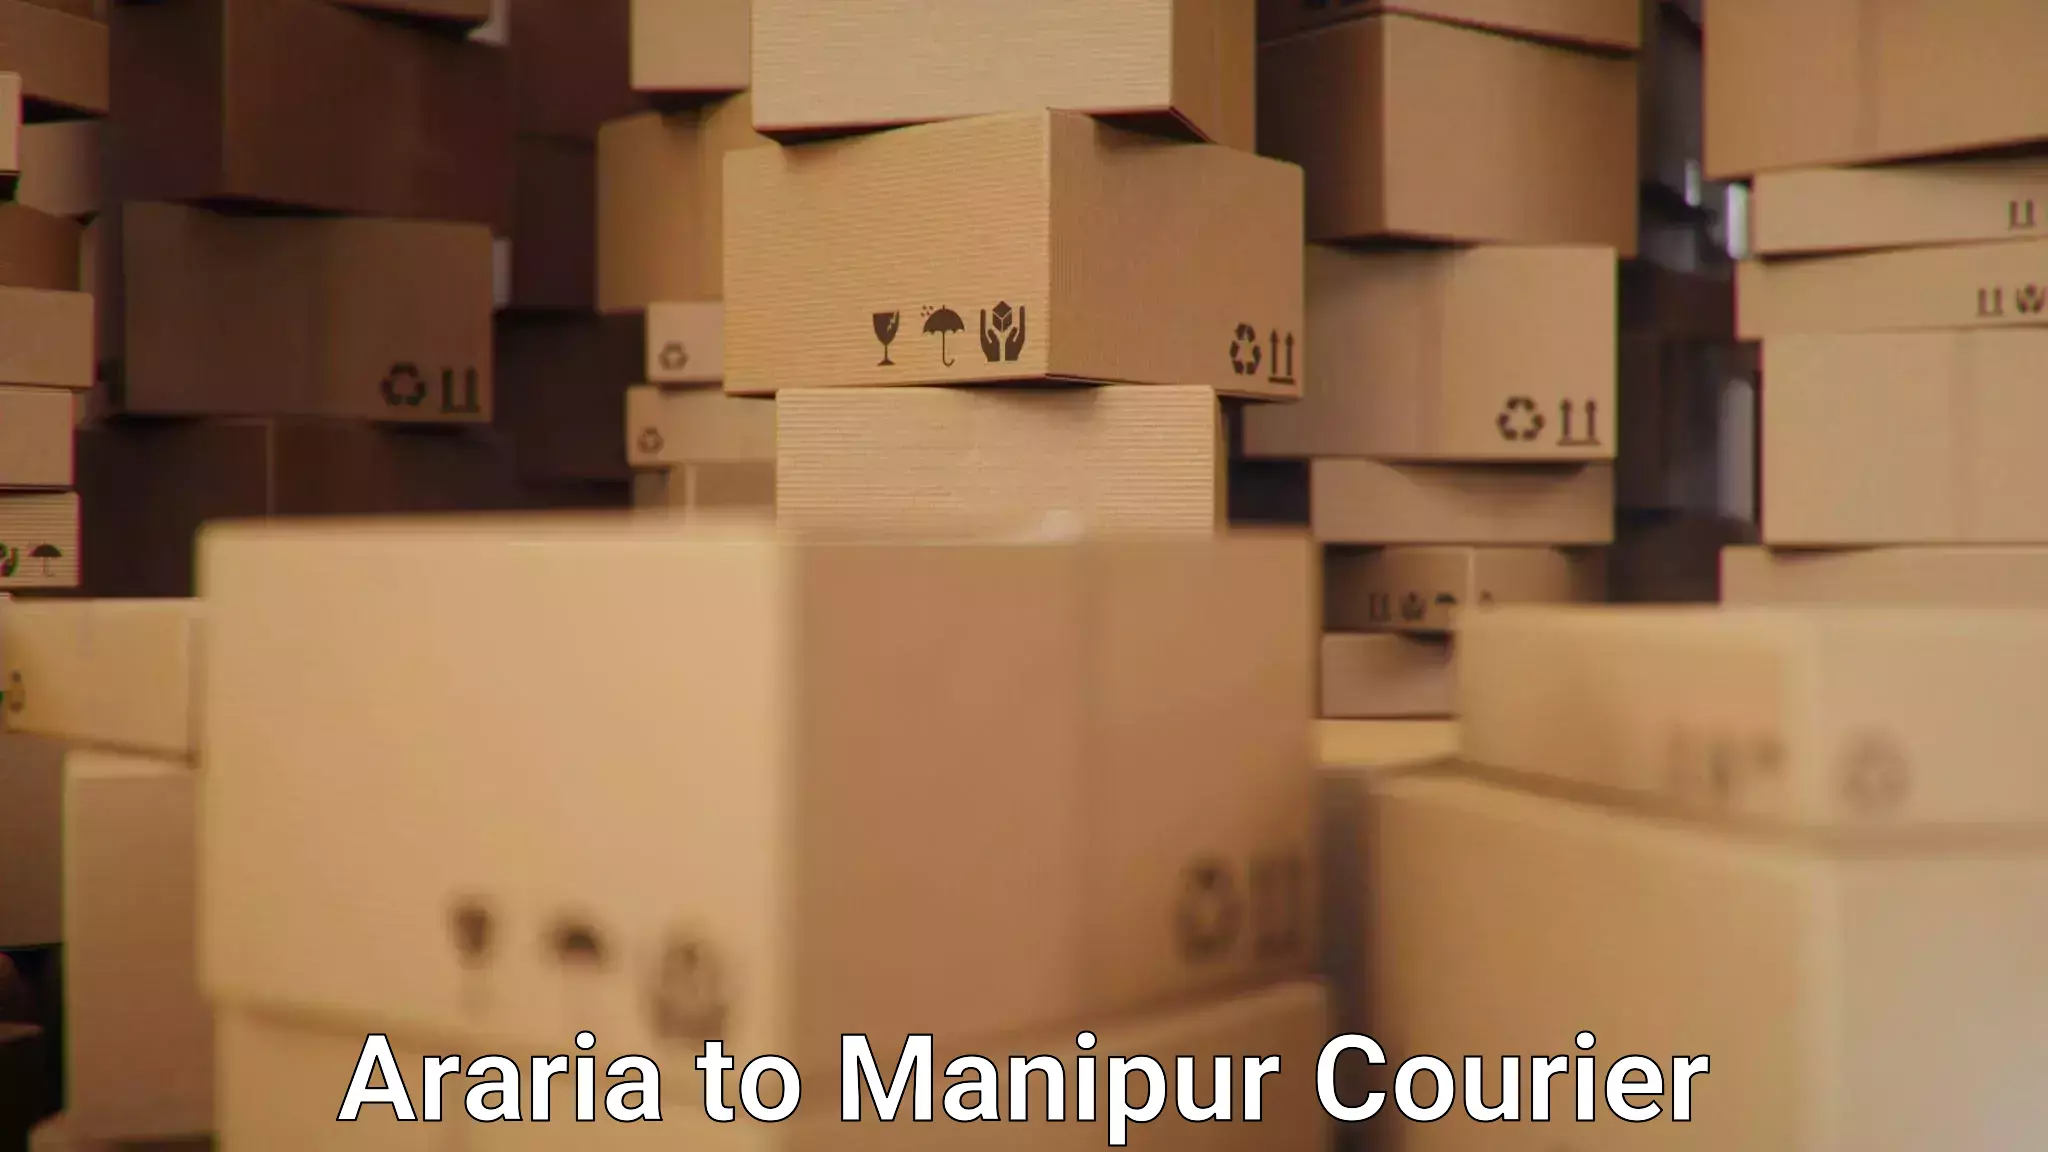 Speedy delivery service Araria to Manipur